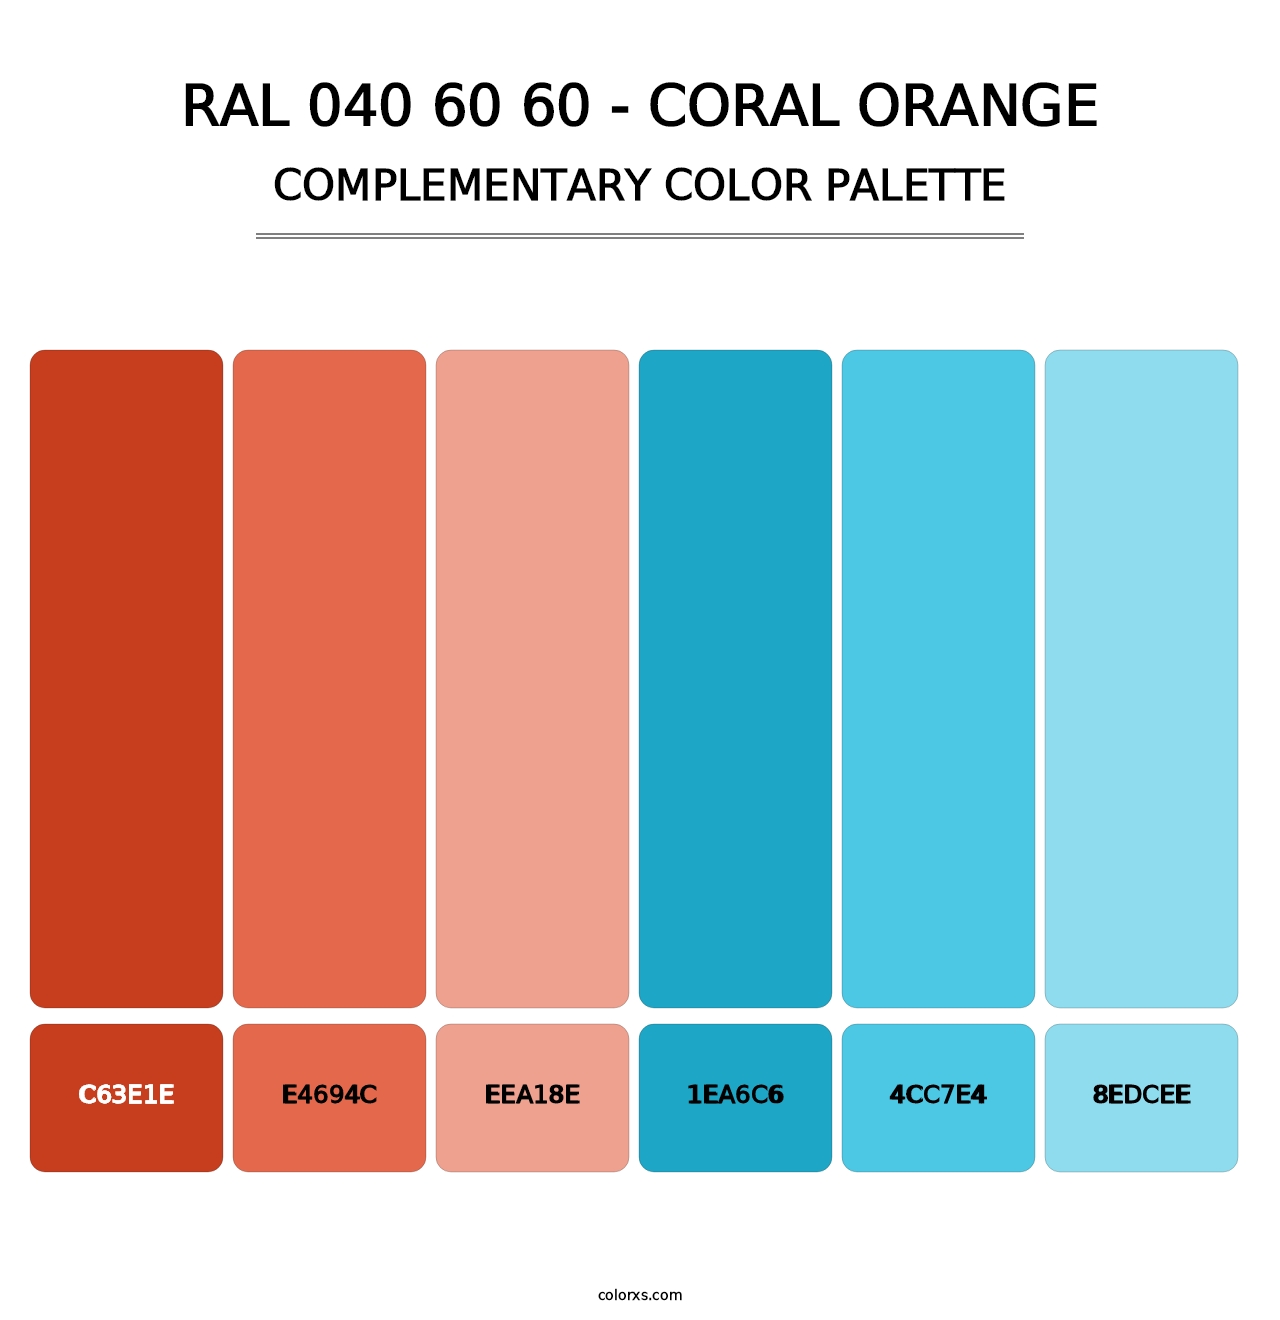 RAL 040 60 60 - Coral Orange - Complementary Color Palette